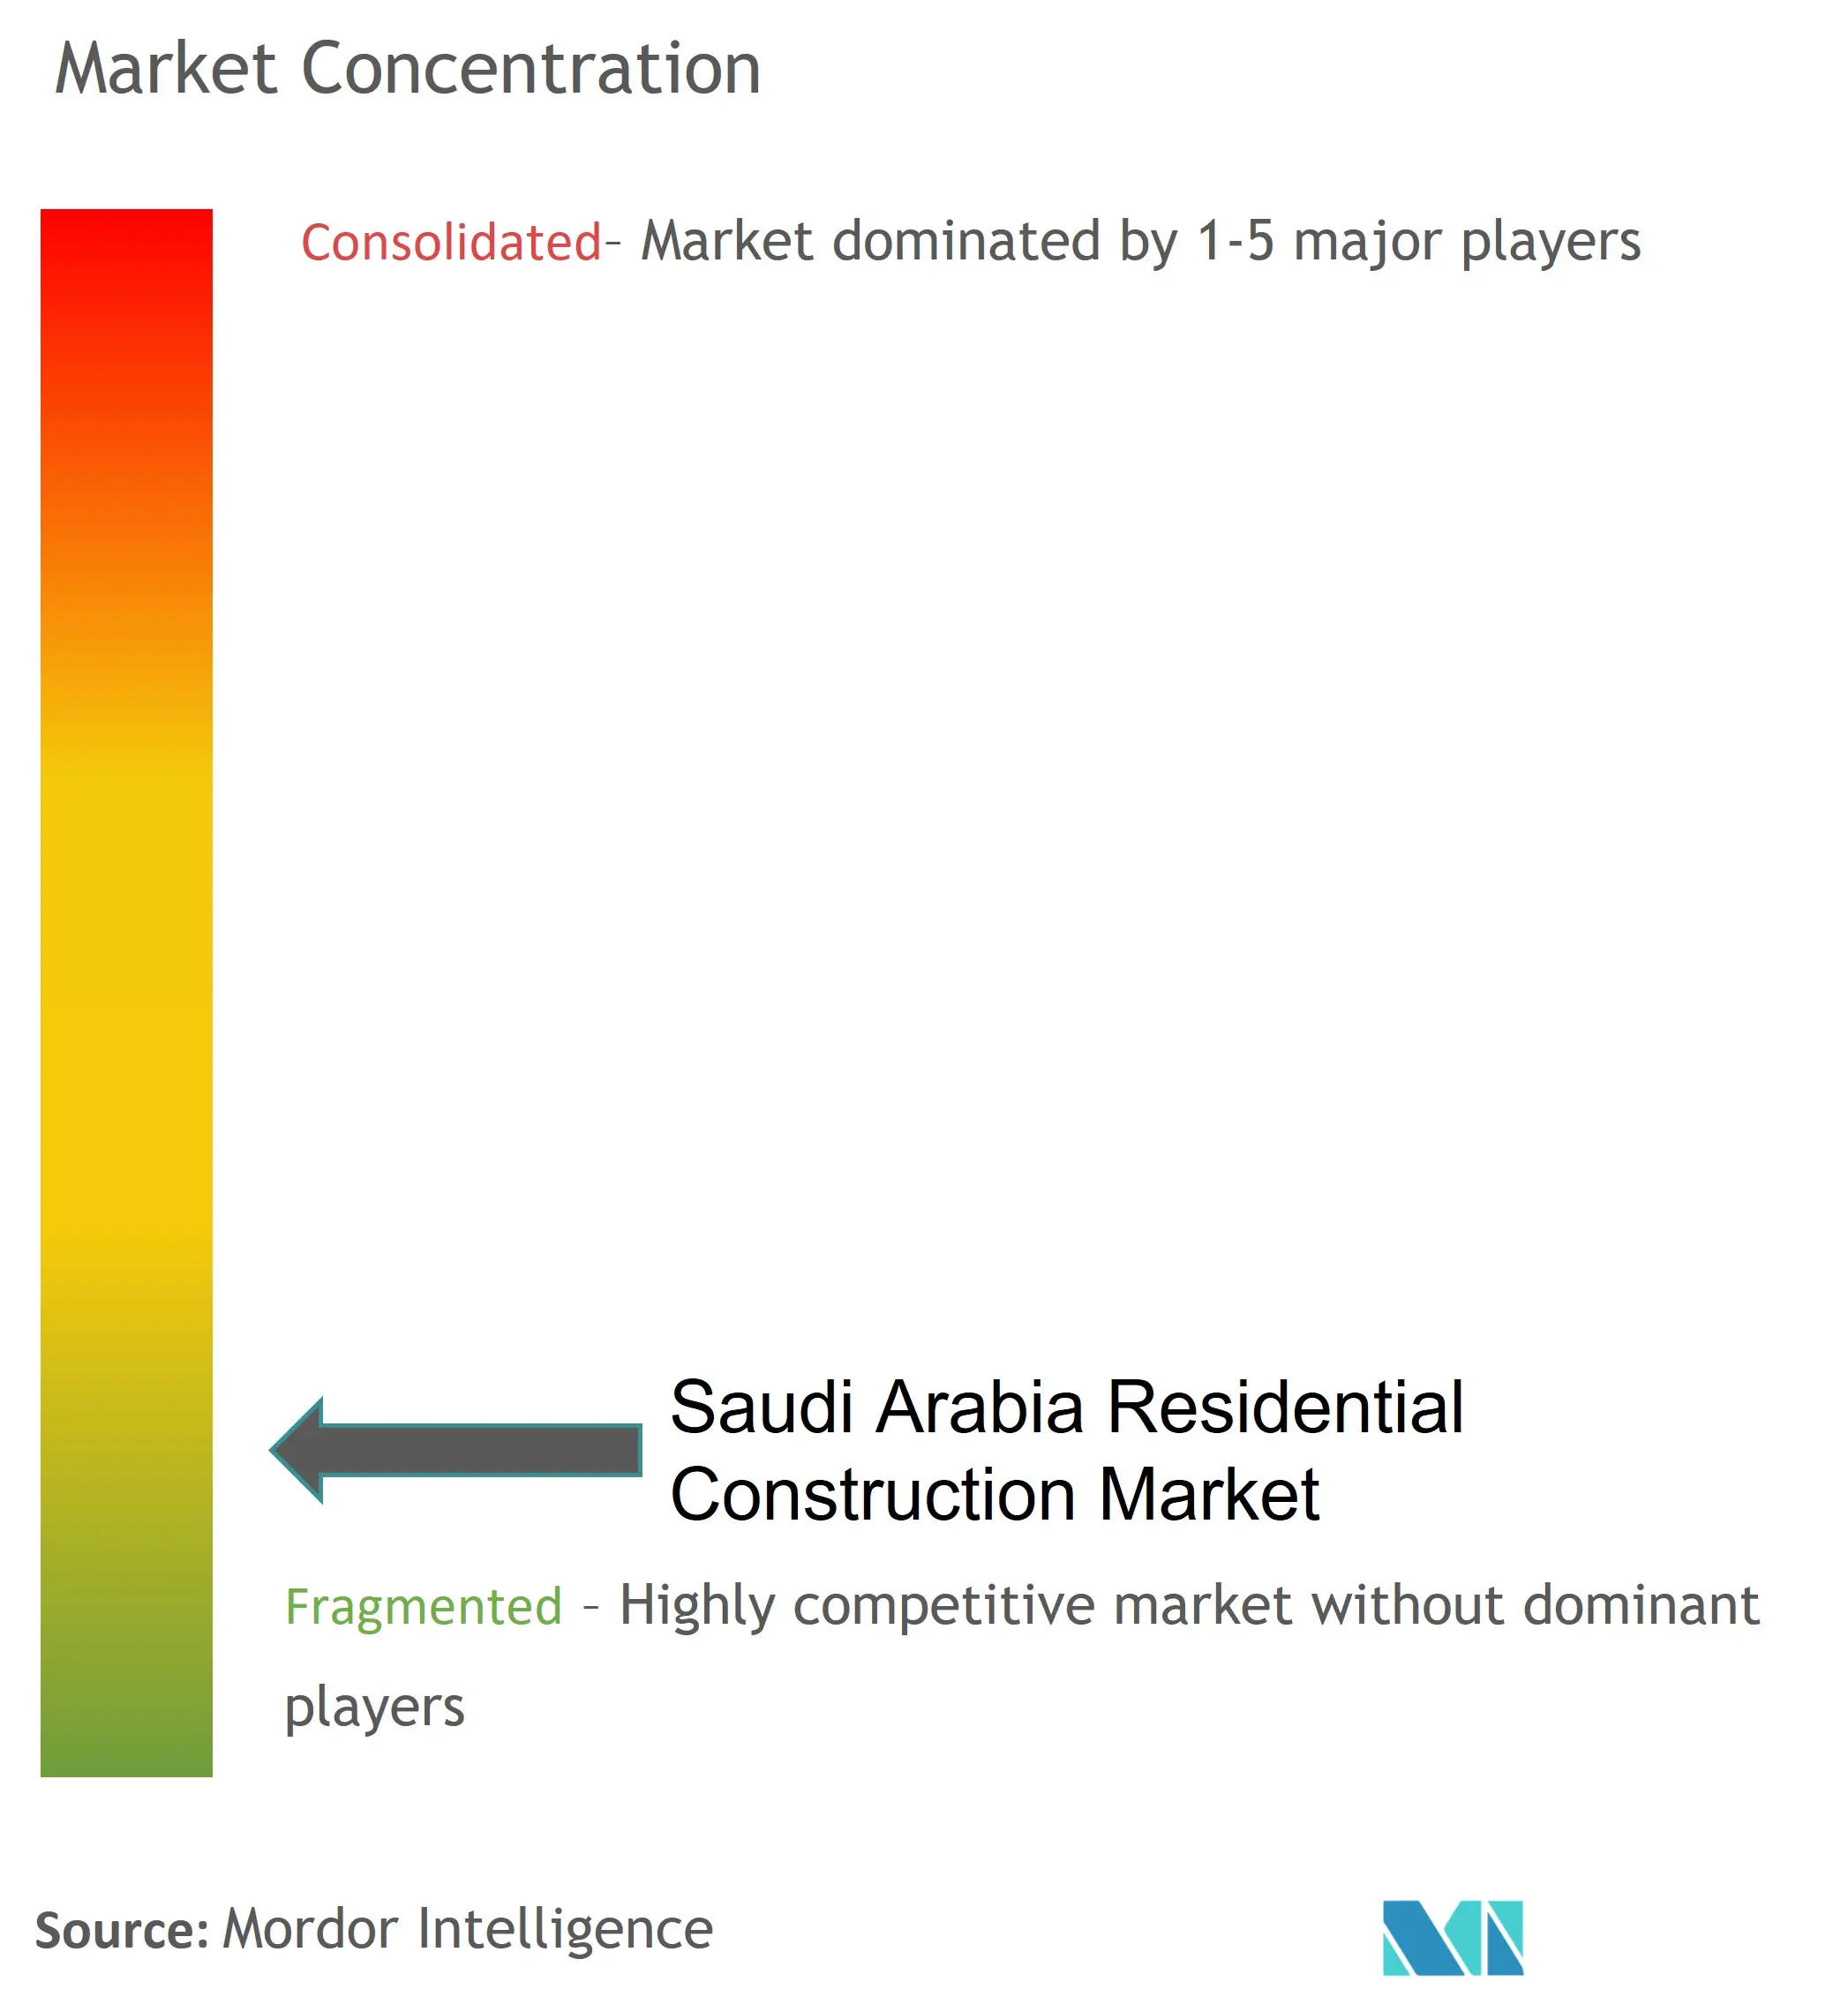 Saudi Arabia Residential Construction Market Concentration